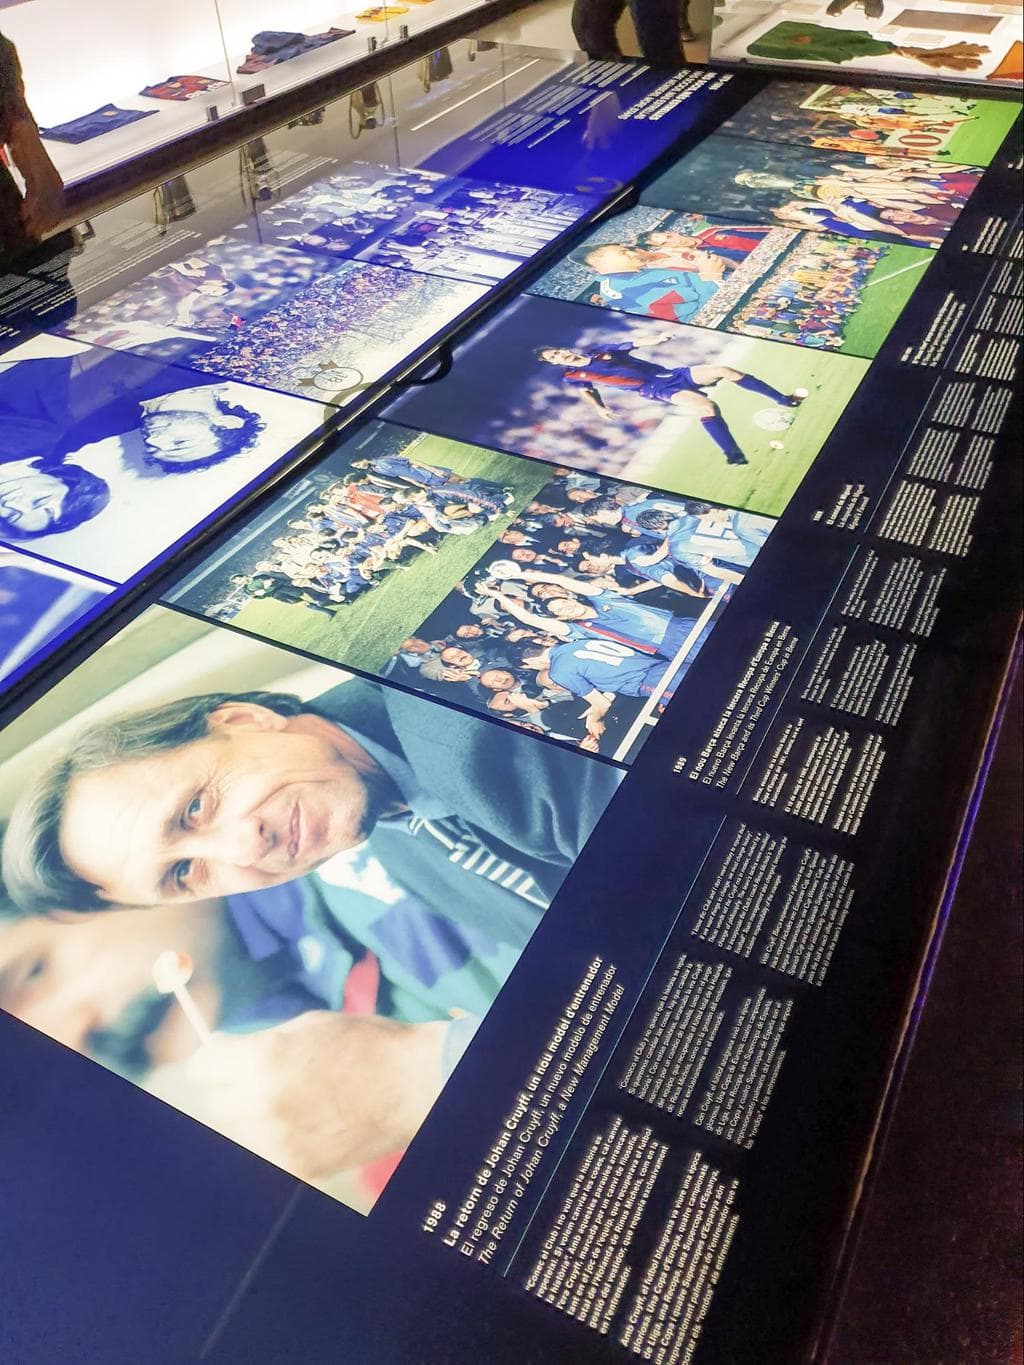 Some of the exhibits, objects and interactive screens at Camp Nou Museum 01